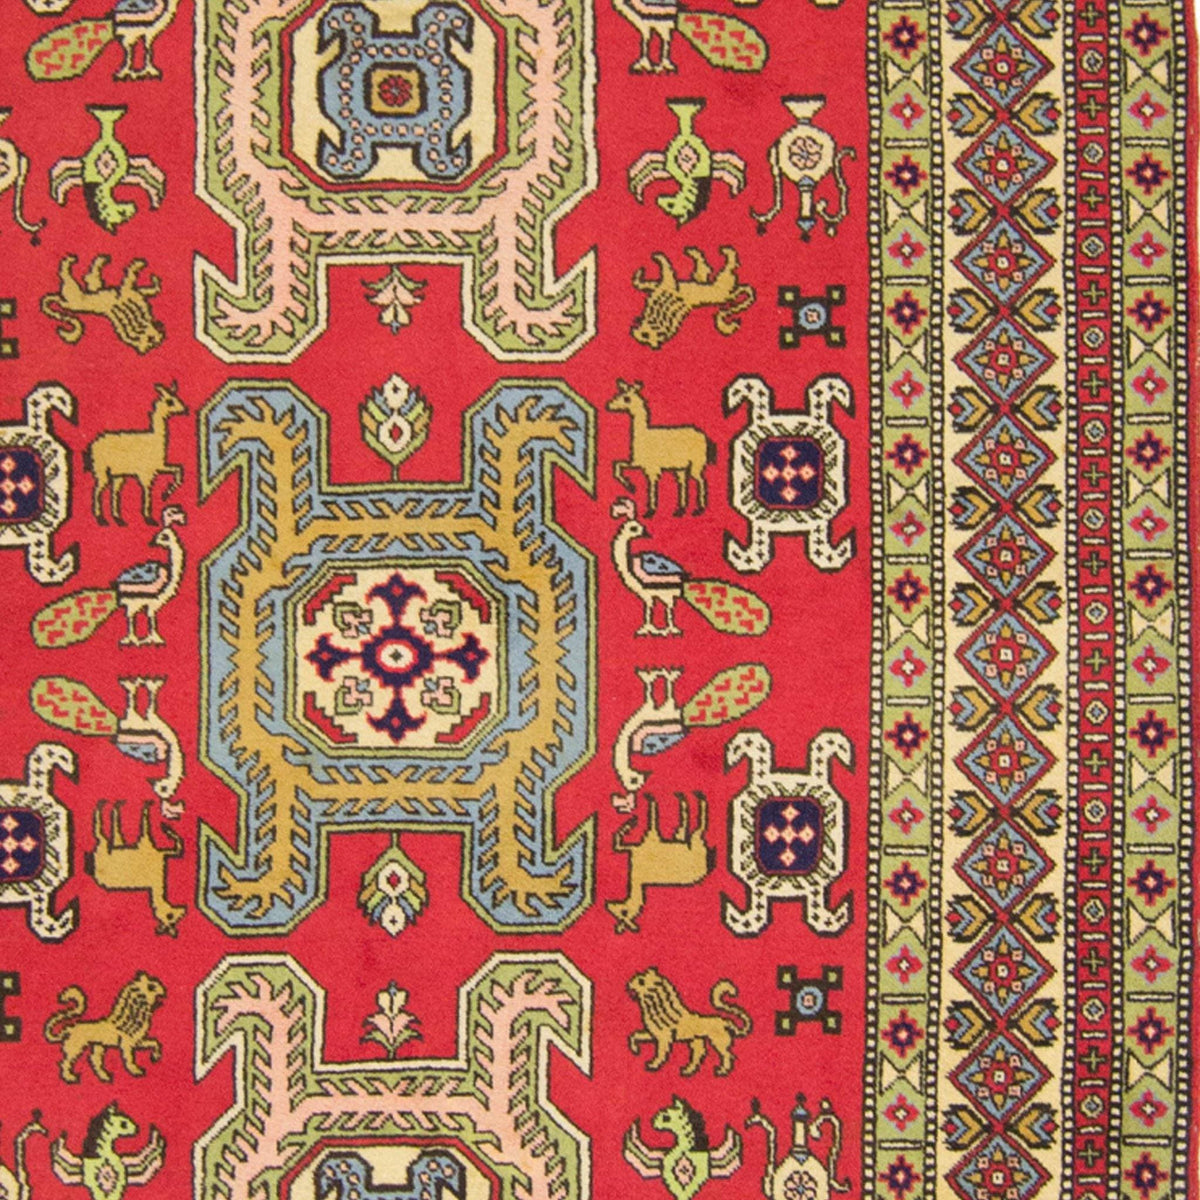 Fine Hand-knotted Wool Persian Sarab Runner 156cm x 327cm